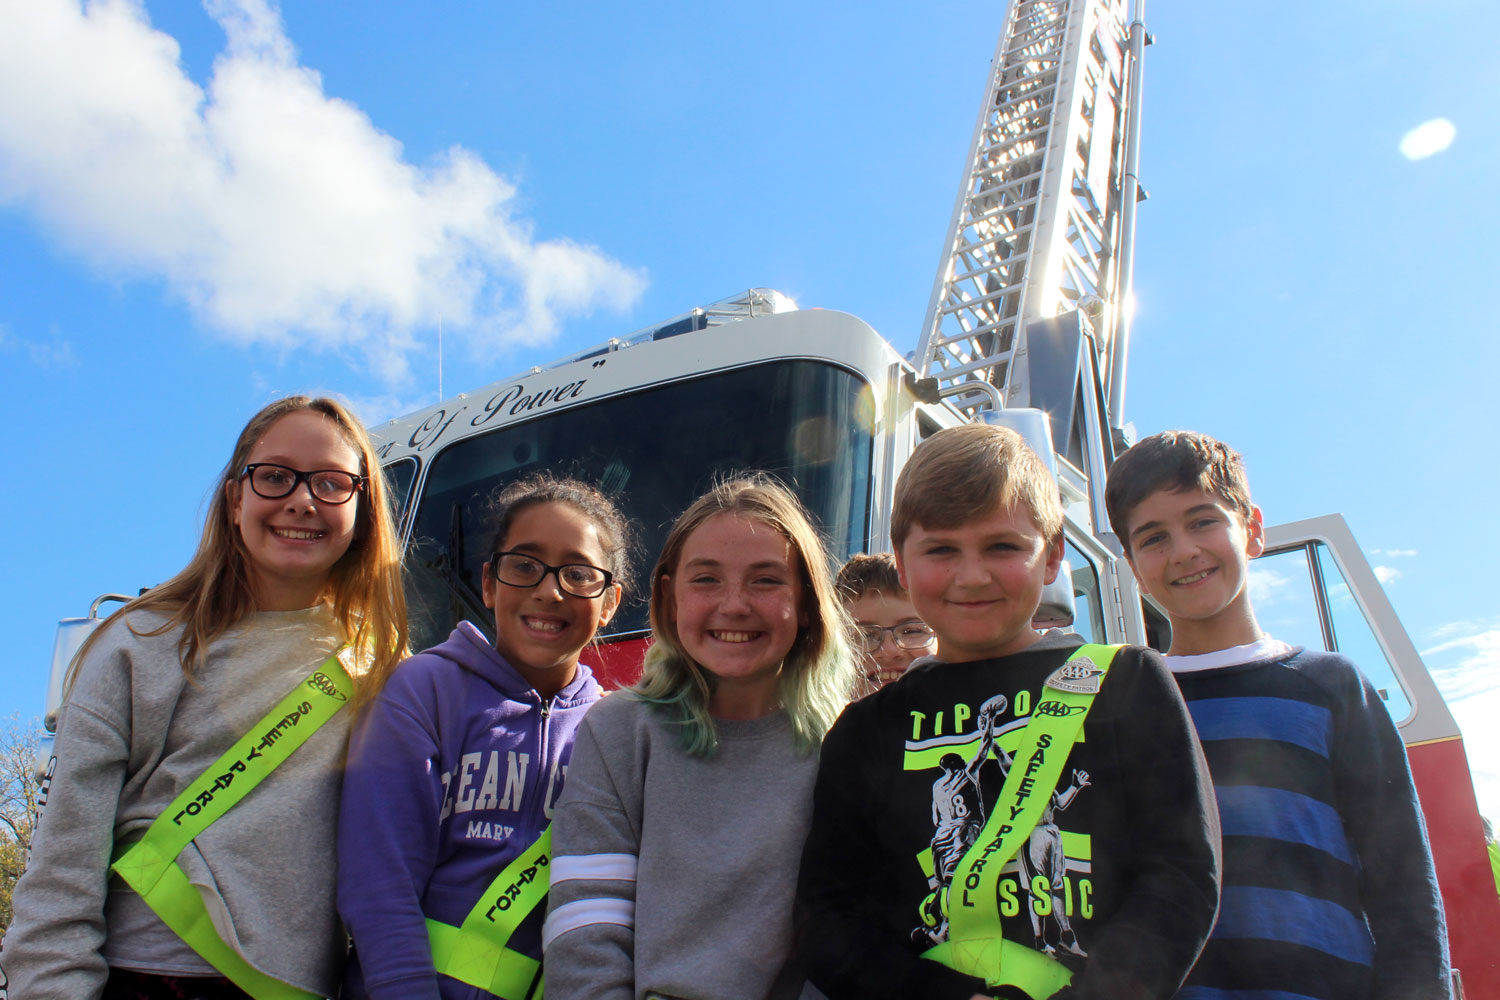 safety patrol poses infront of the ladder truck